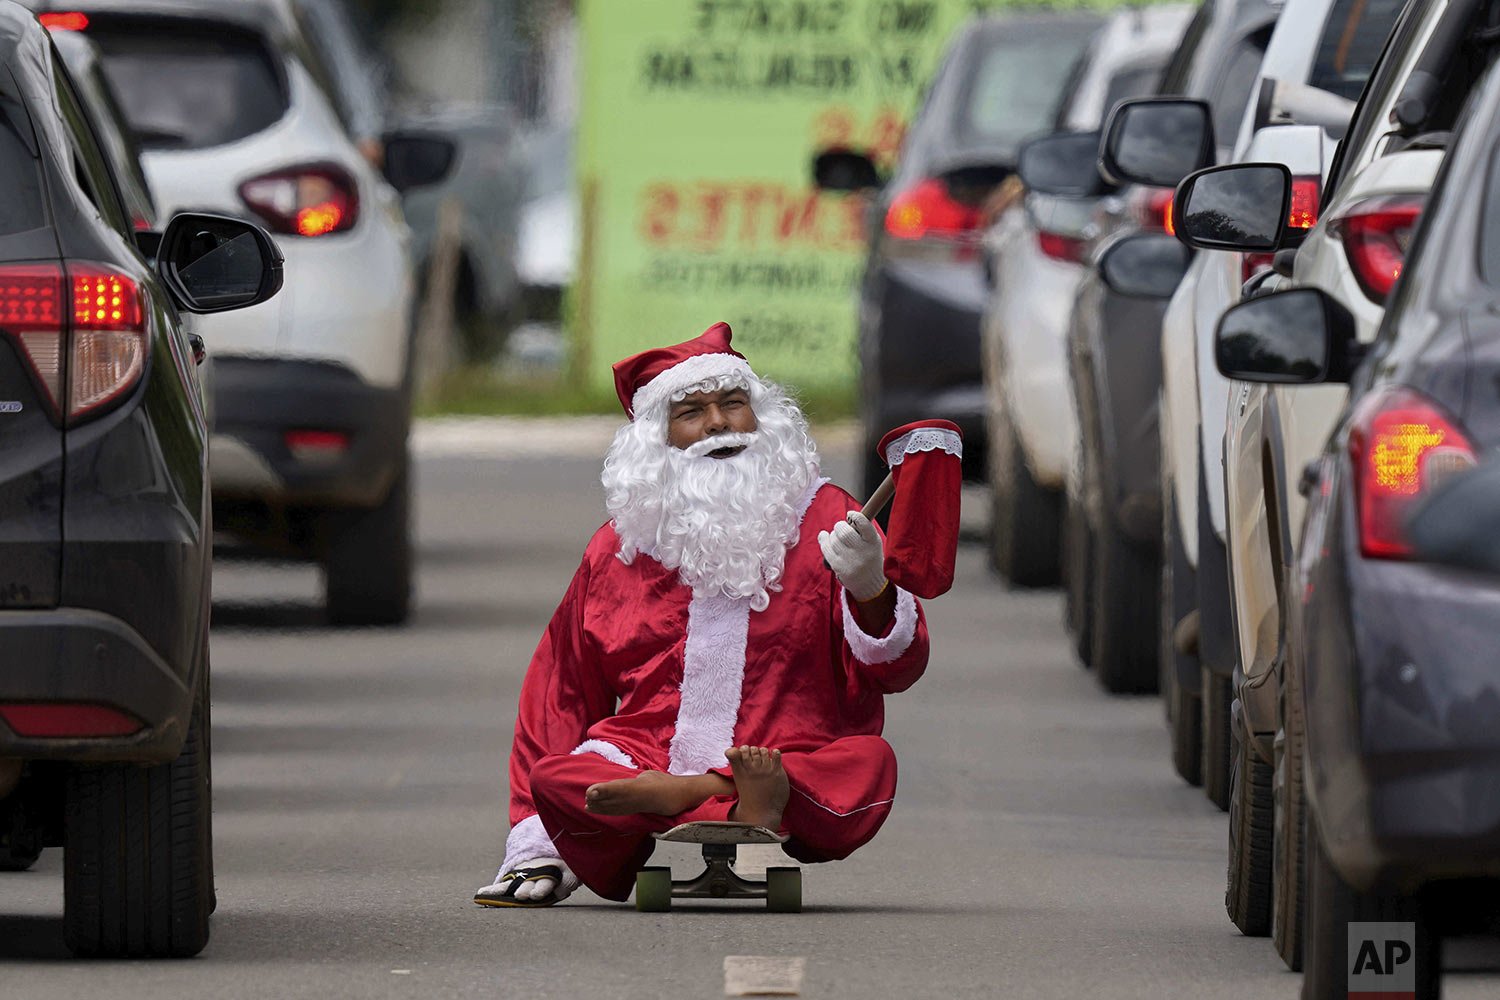  Jose Ivanildo, who lost the use of his legs due to infantile paralysis, uses a skate board as he begs for money at a traffic light dressed as Santa Claus in Brasilia, Brazil, Dec. 21, 2021. The 48-year-old, known as "Ivanildo do Skate," said that th